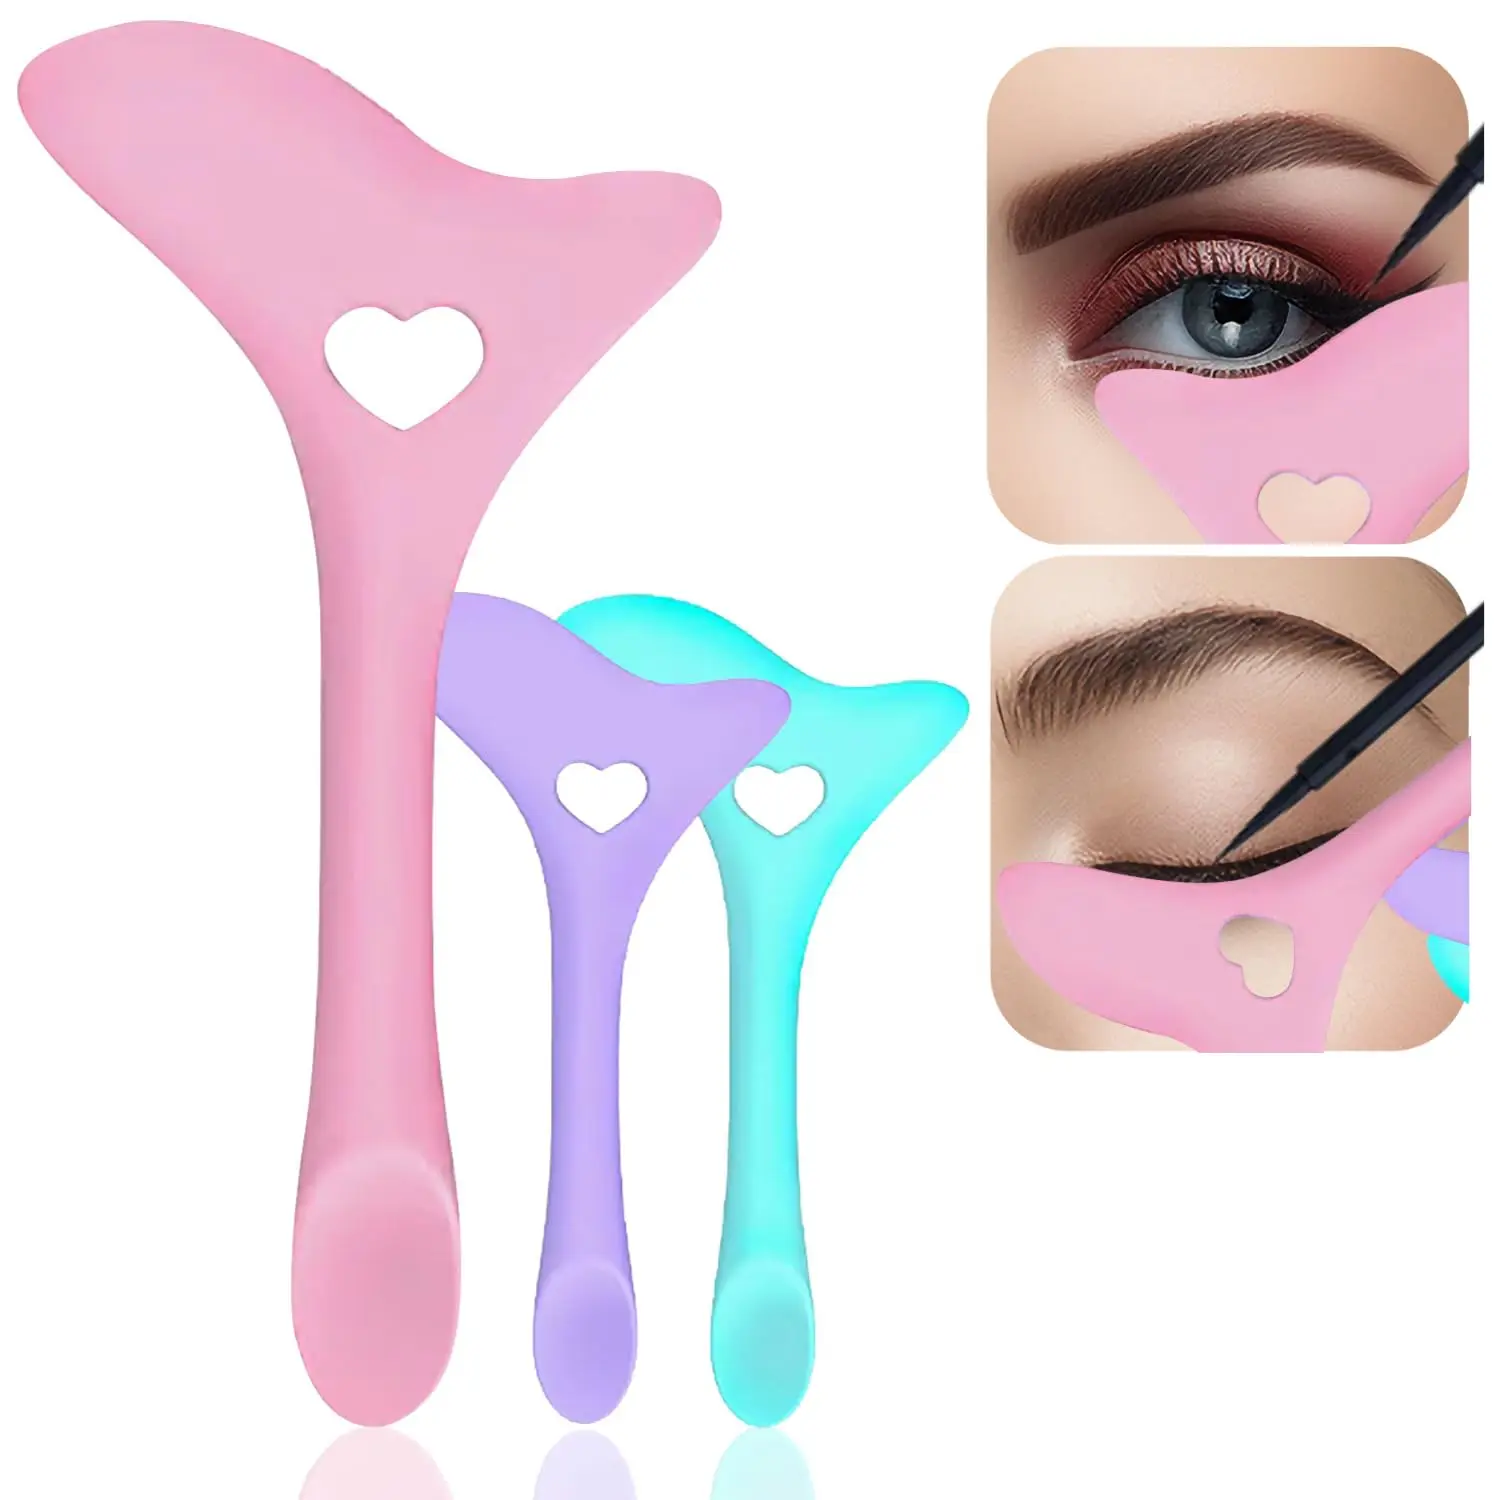 

1PC Silicone Eyeliner Eyeshadow Stencil Templates Make Up Tools For Eye Makeup Cat Eye Line Guide Cosmetic Tool For Women